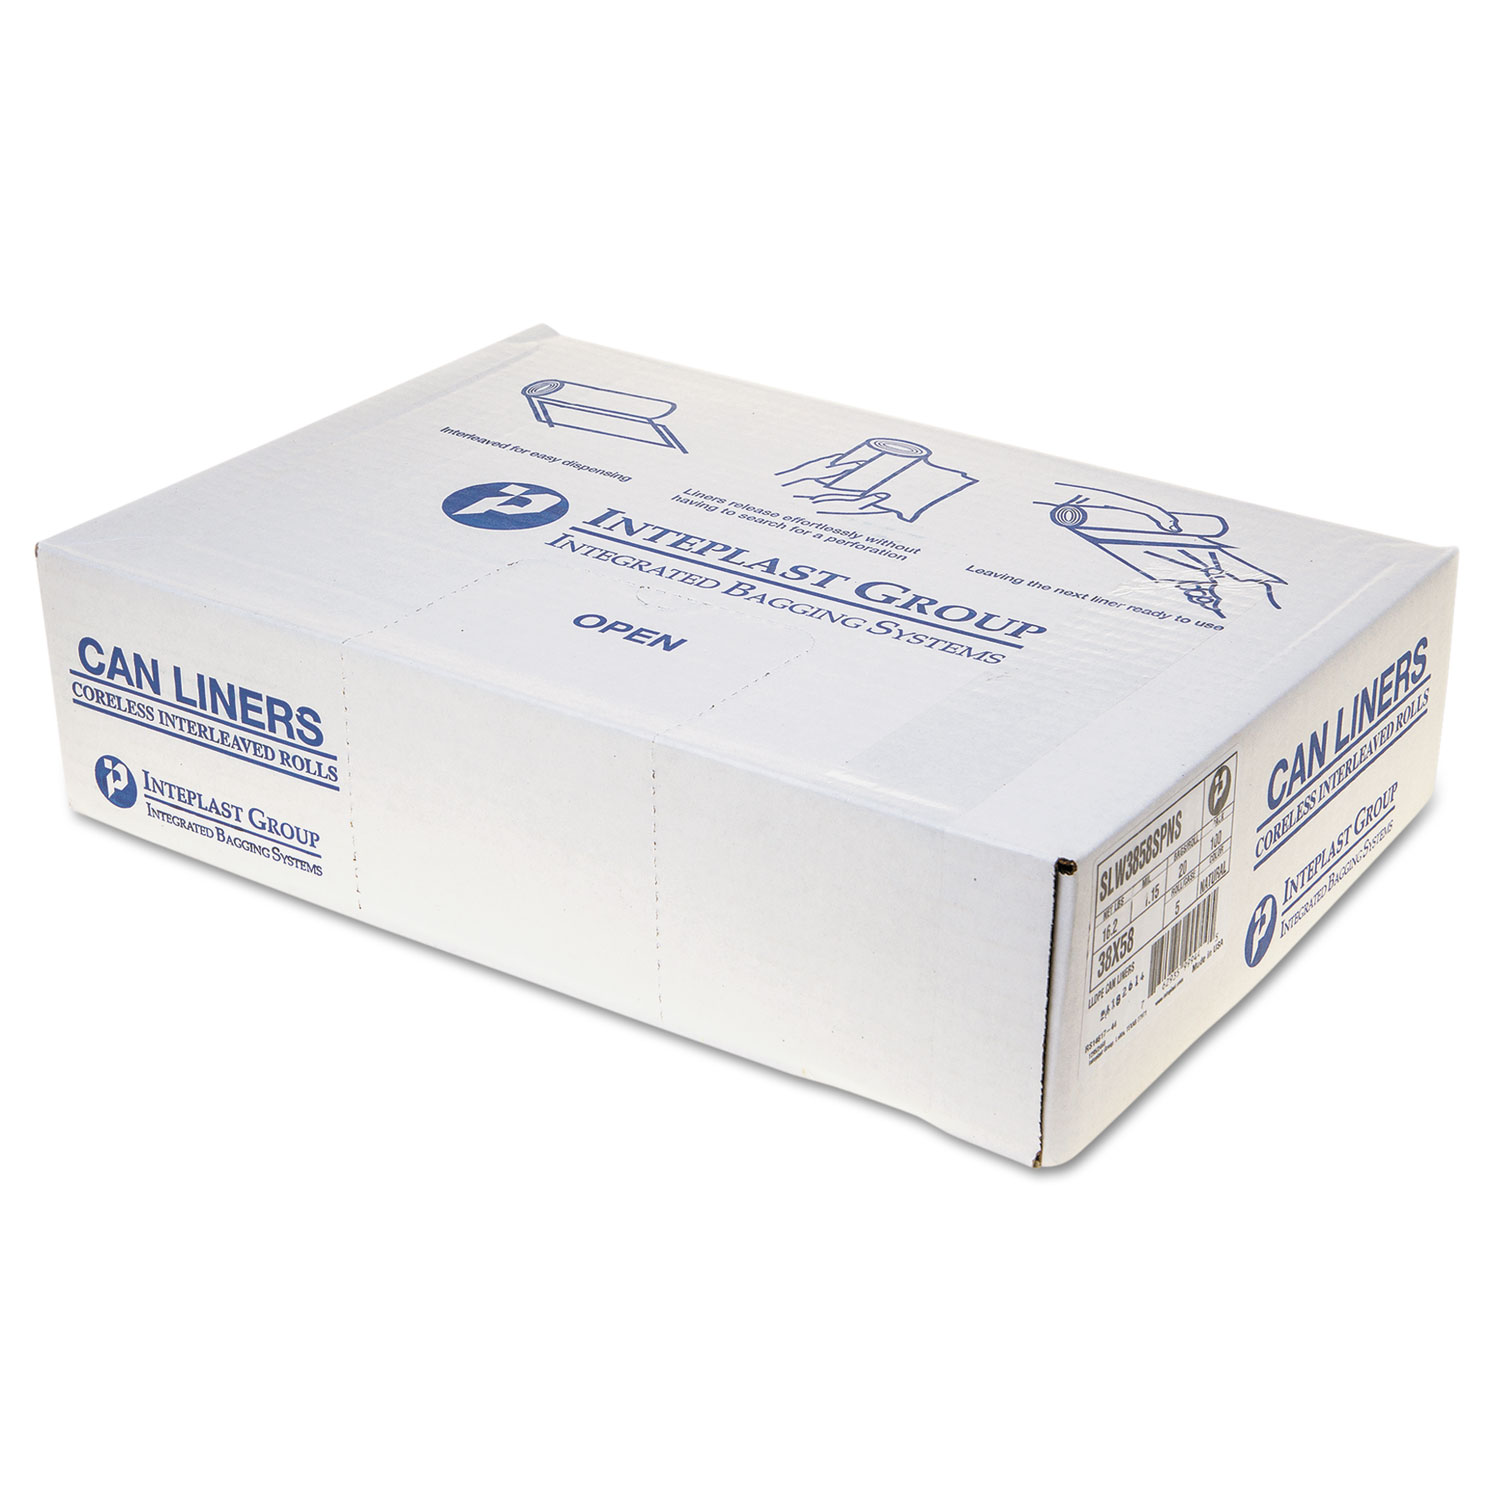  Inteplast Group SLW3858SPNS Low-Density Commercial Can Liners, 60 gal, 1.15 mil, 38 x 58, Clear, 100/Carton (IBSSLW3858SPNS) 